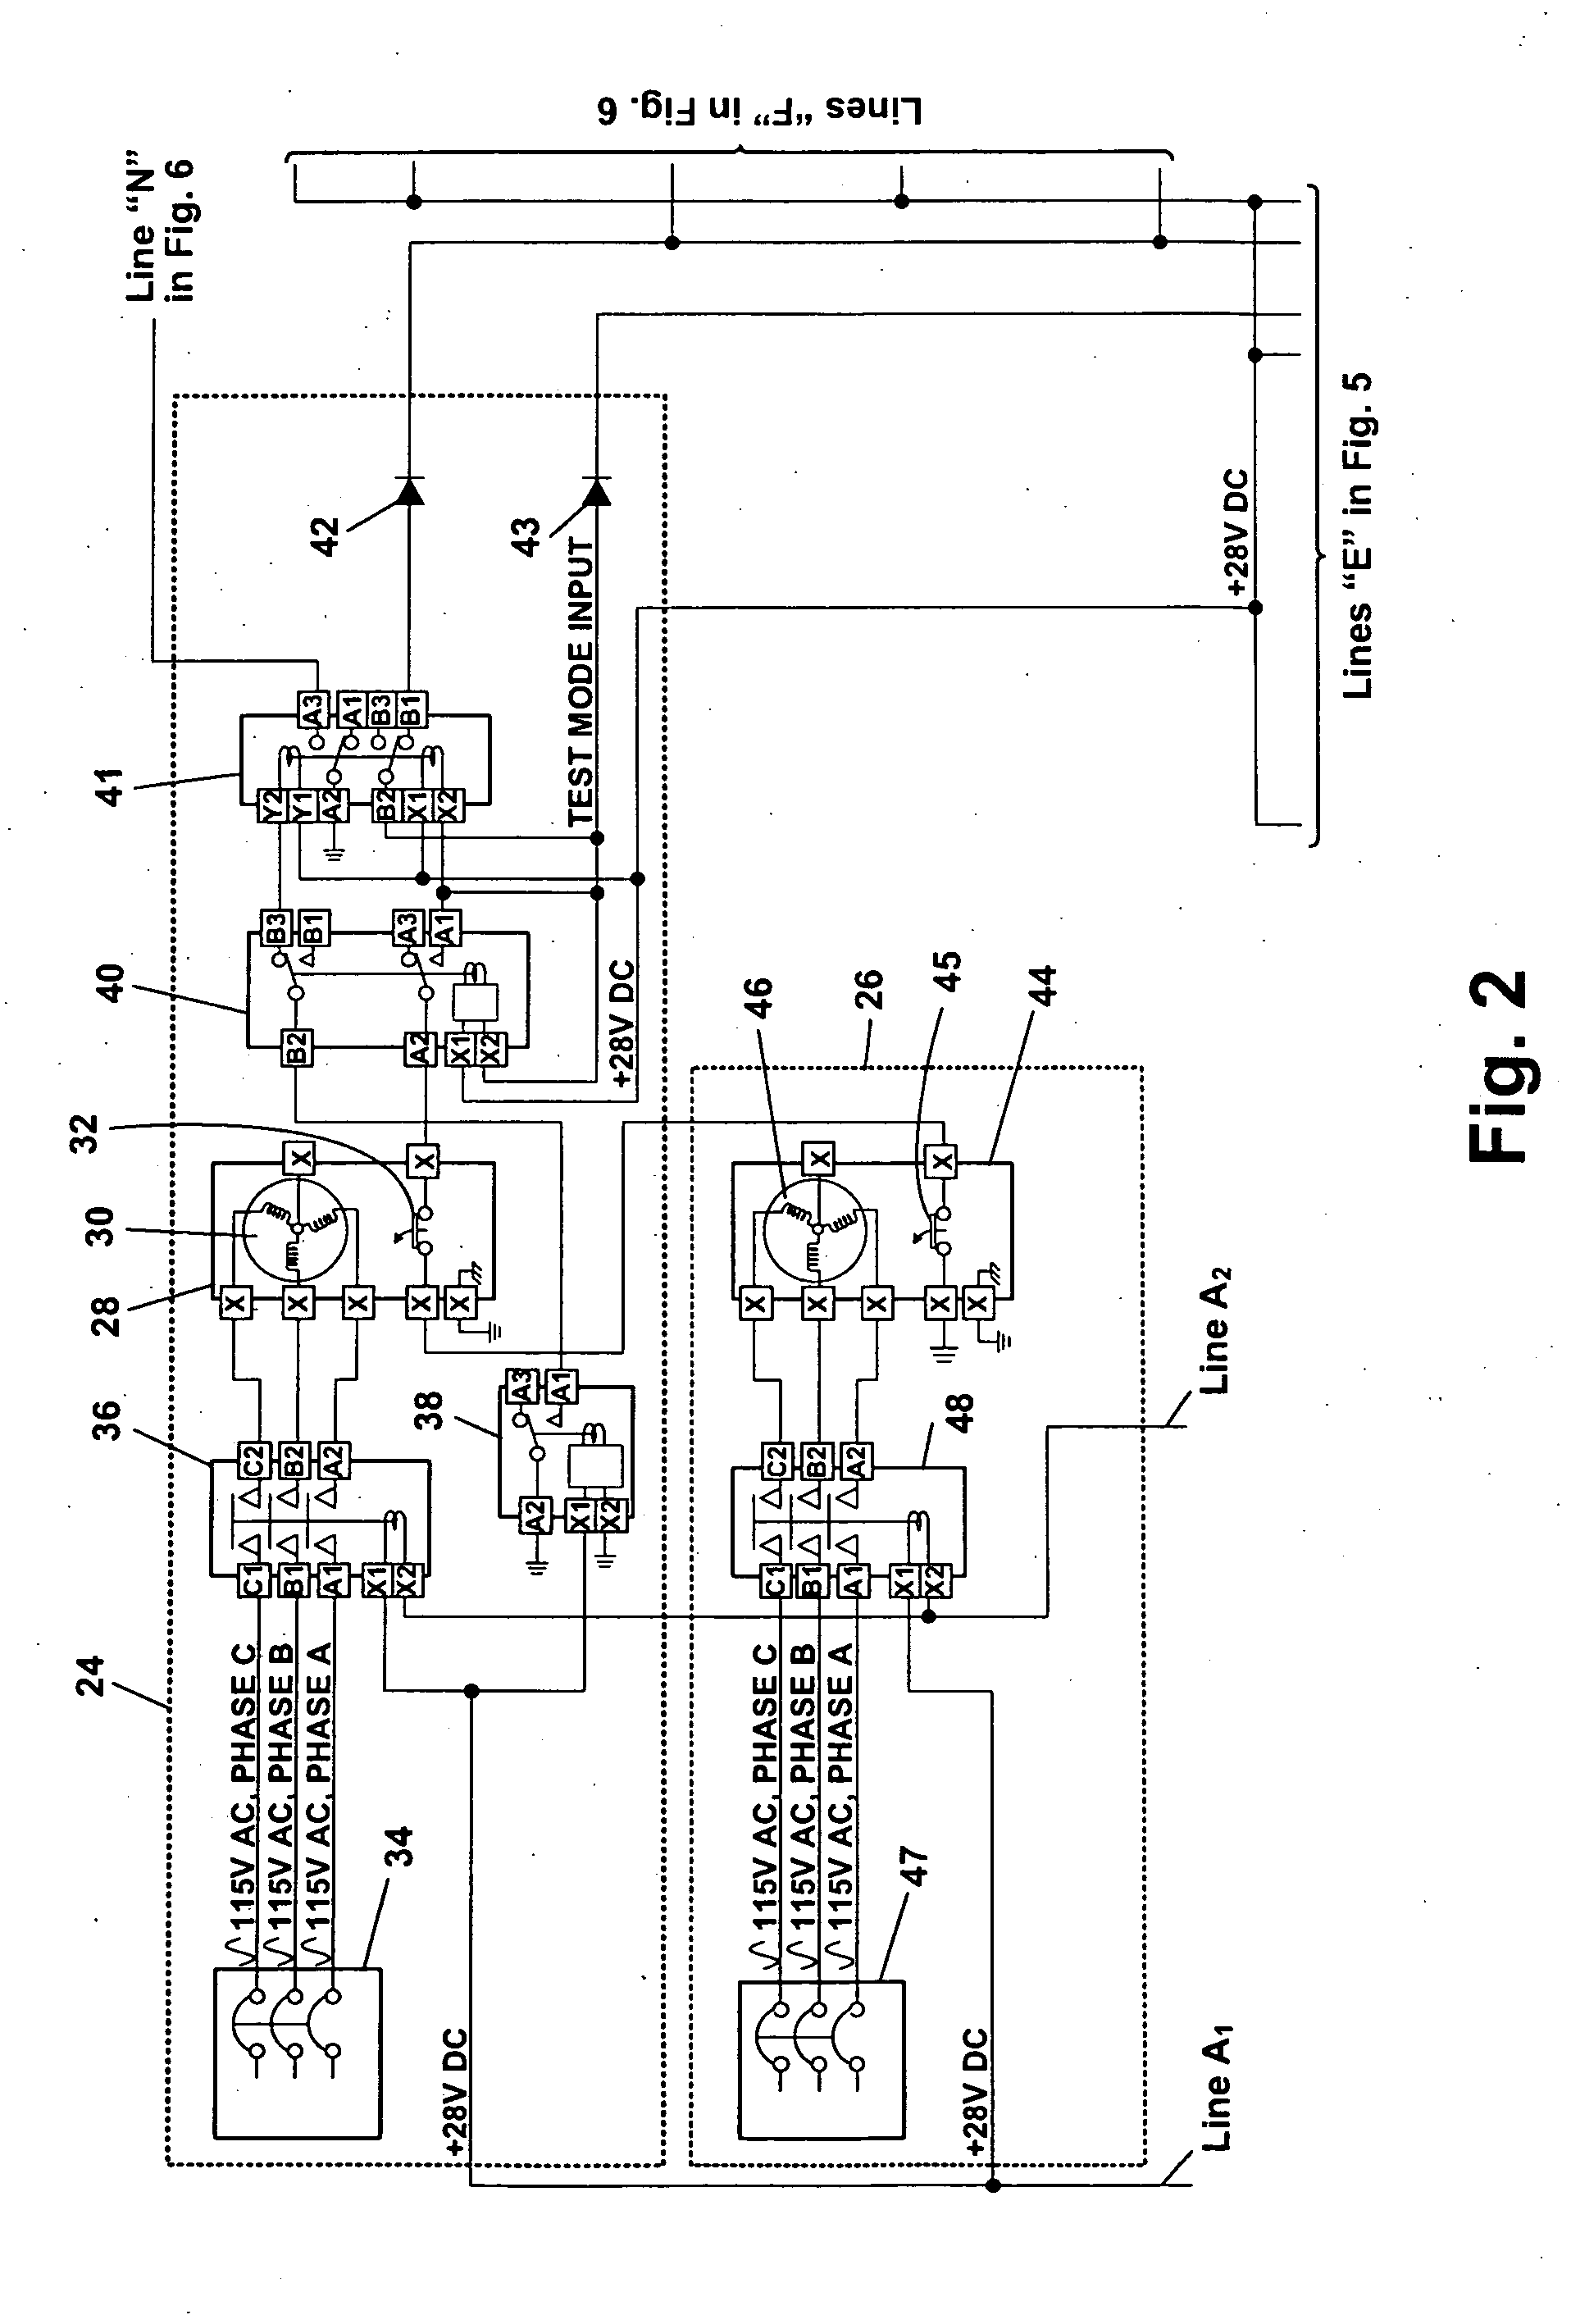 Apparatus and method for controlling an aircraft cooling and smoke system using discrete components